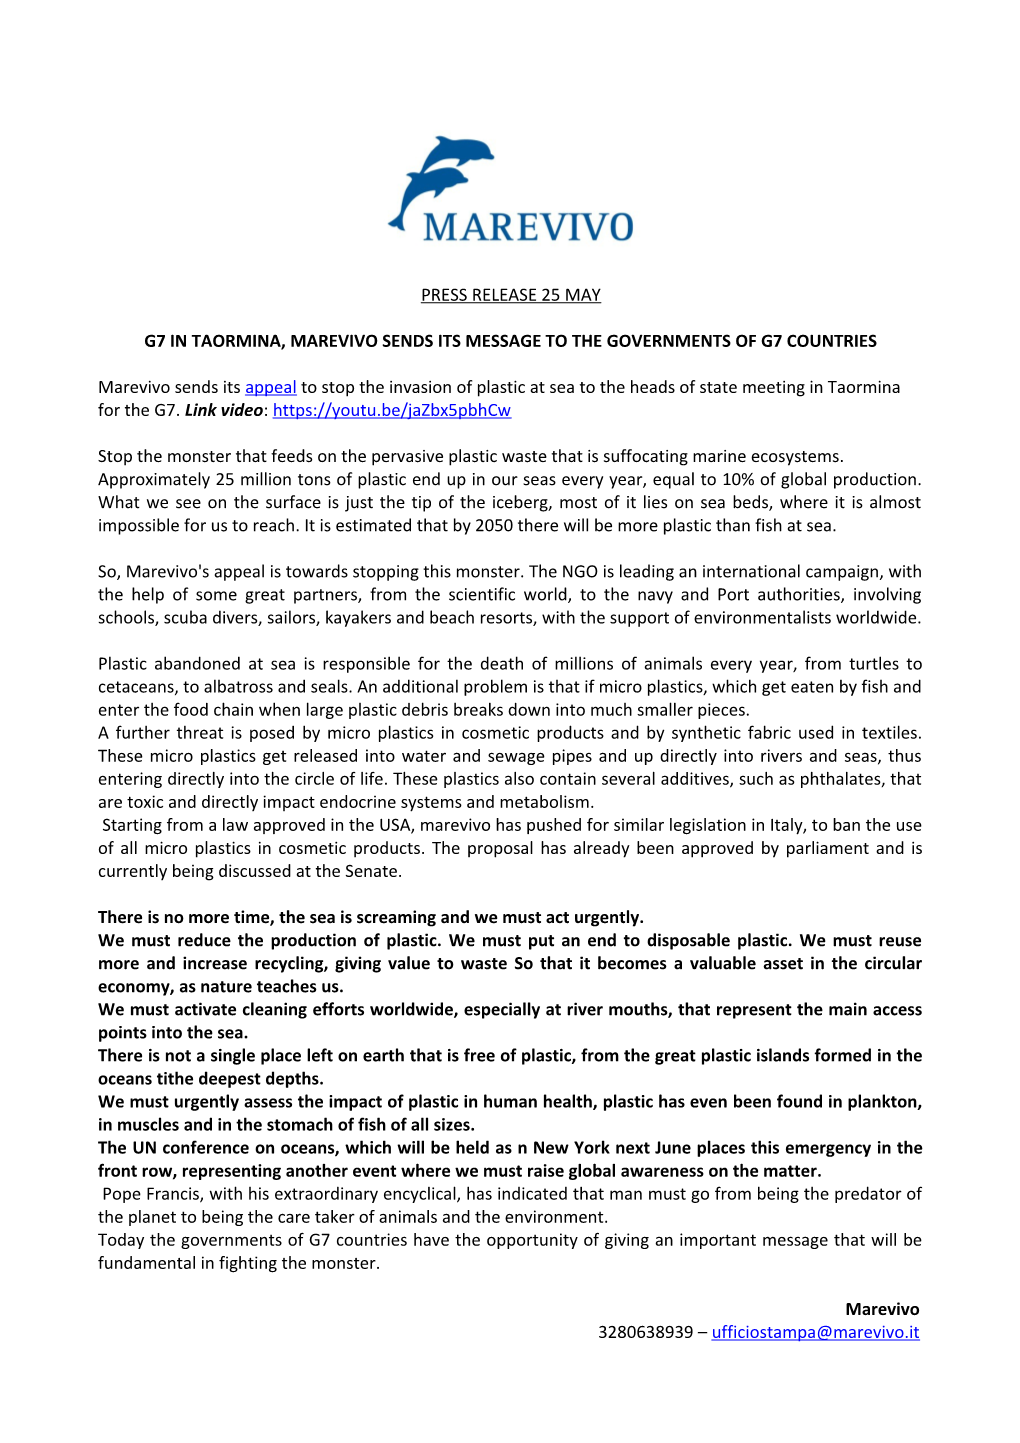 G7 in Taormina, Marevivo Sends Its Message to the Governments of G7 Countries